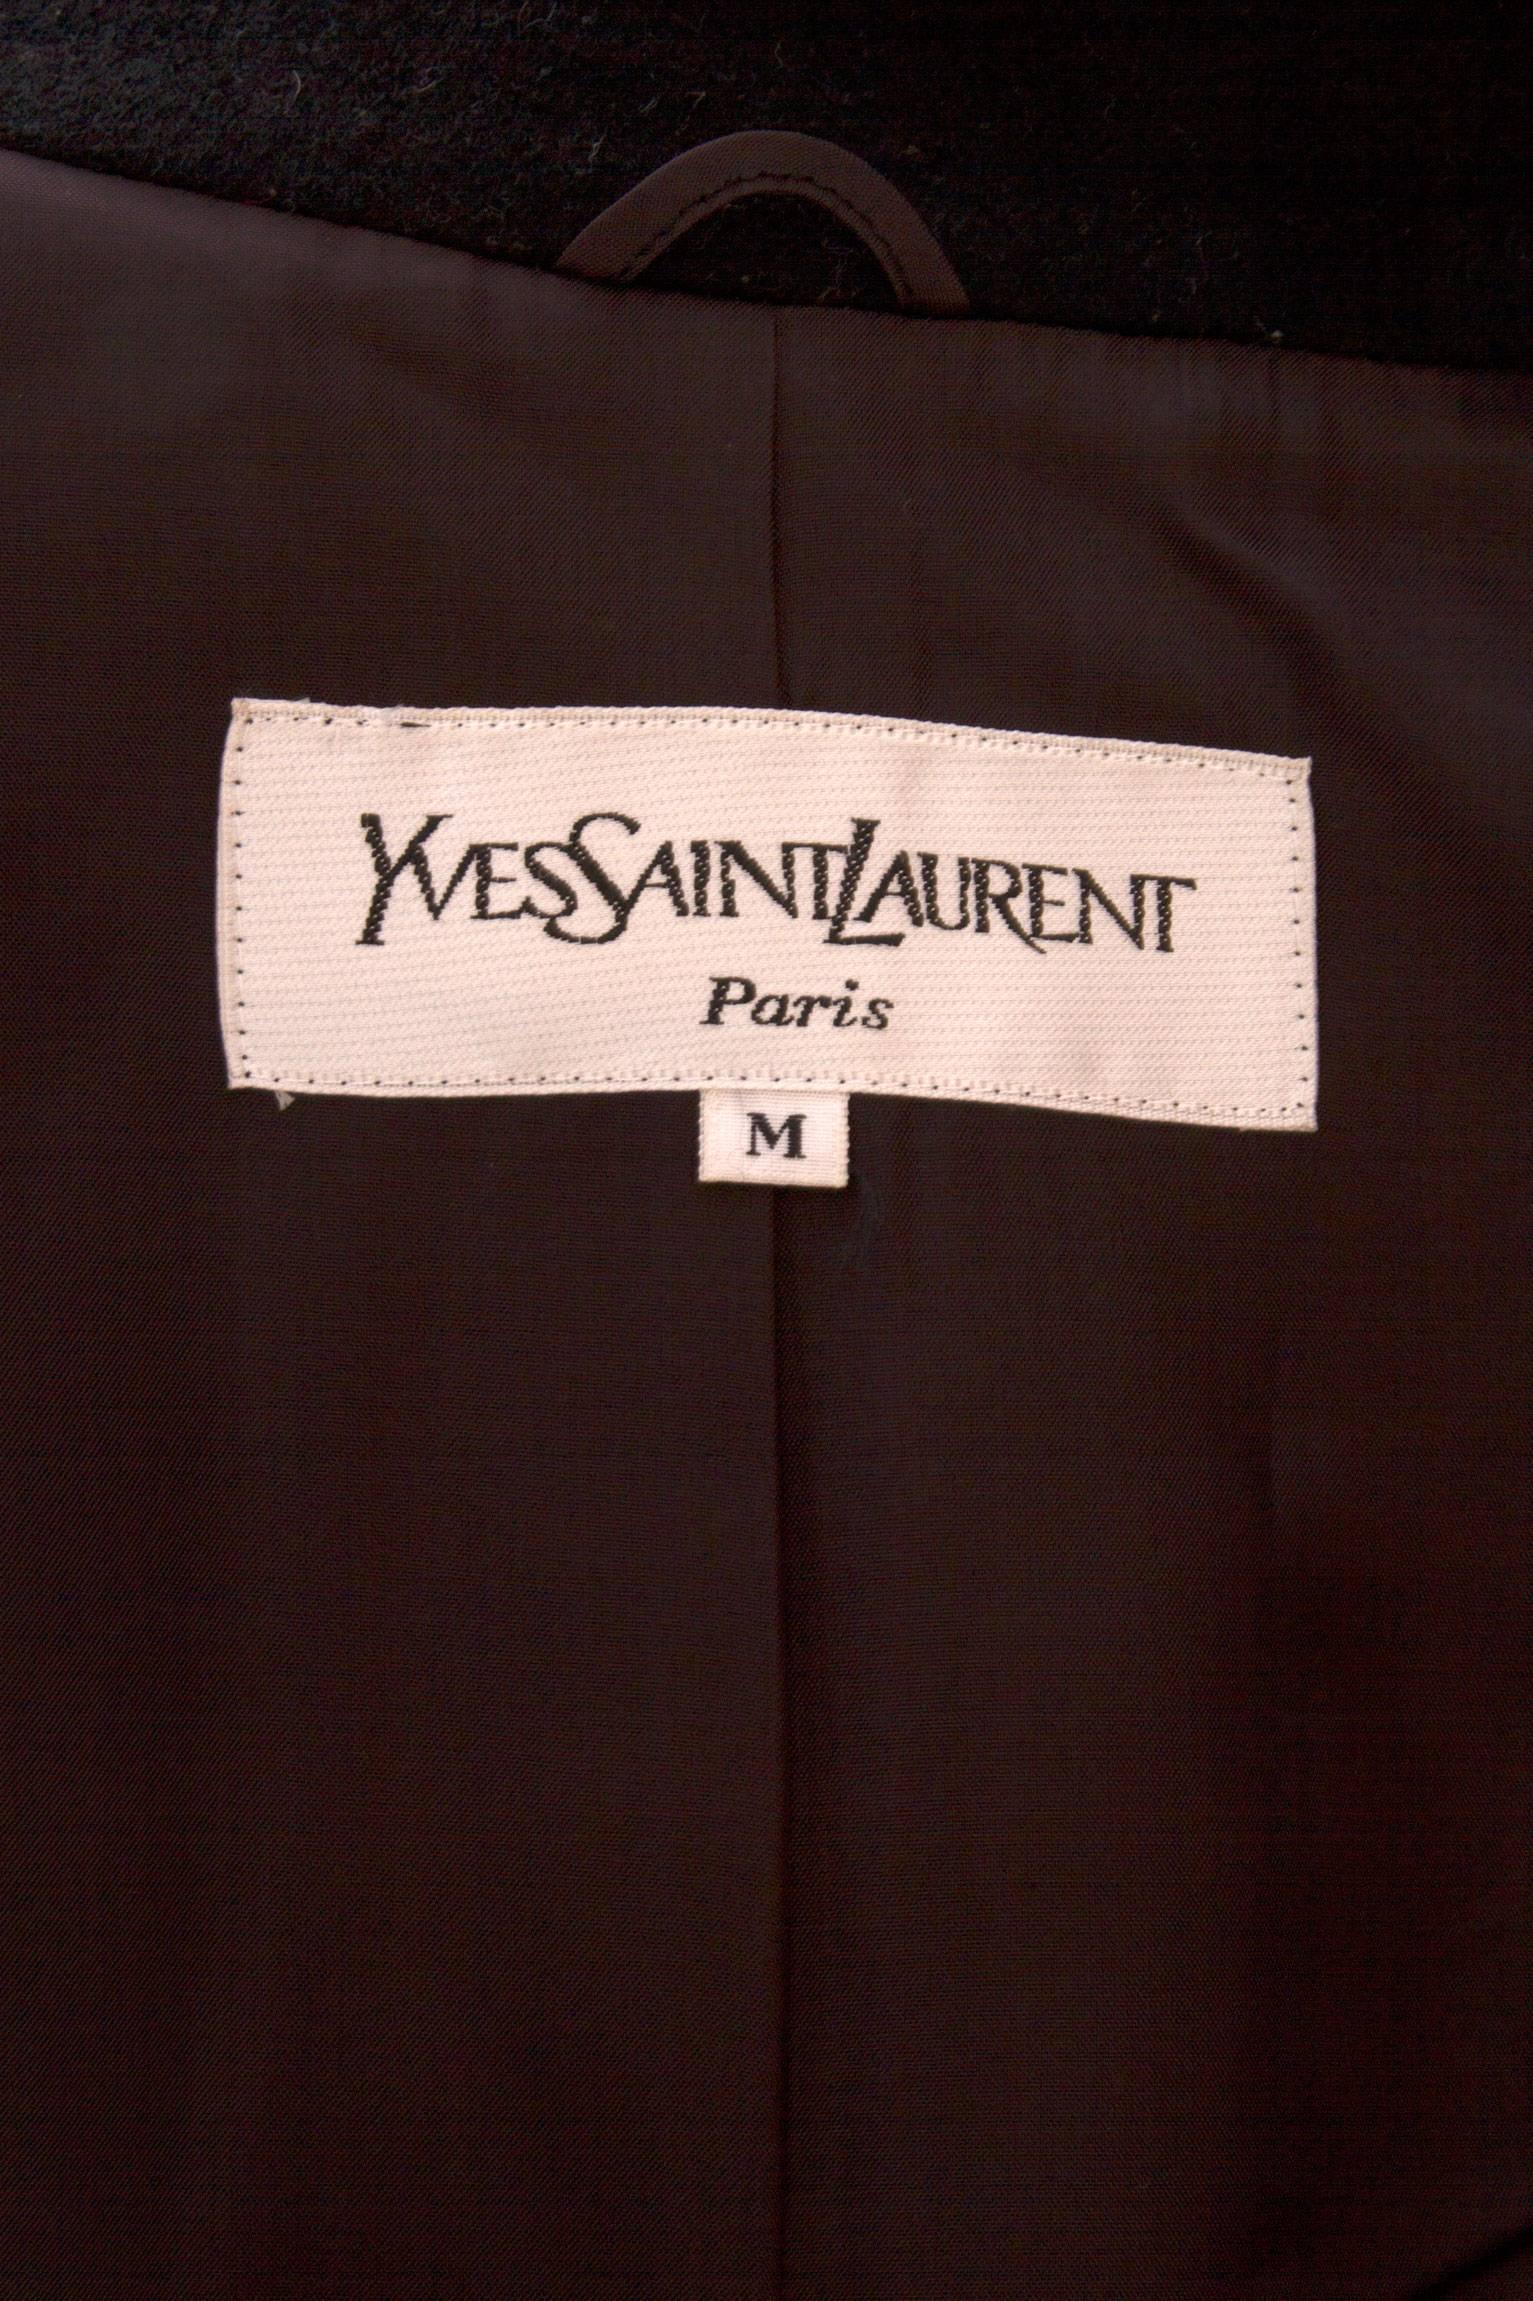 A 1980s black Yves Saint Laurent wool coat with a wide off-white panel down the front. 
The coat has a black stand up collar and buttons down the front with large black buttons standing as a delicate contrast to the white panel. 
The long sleeves